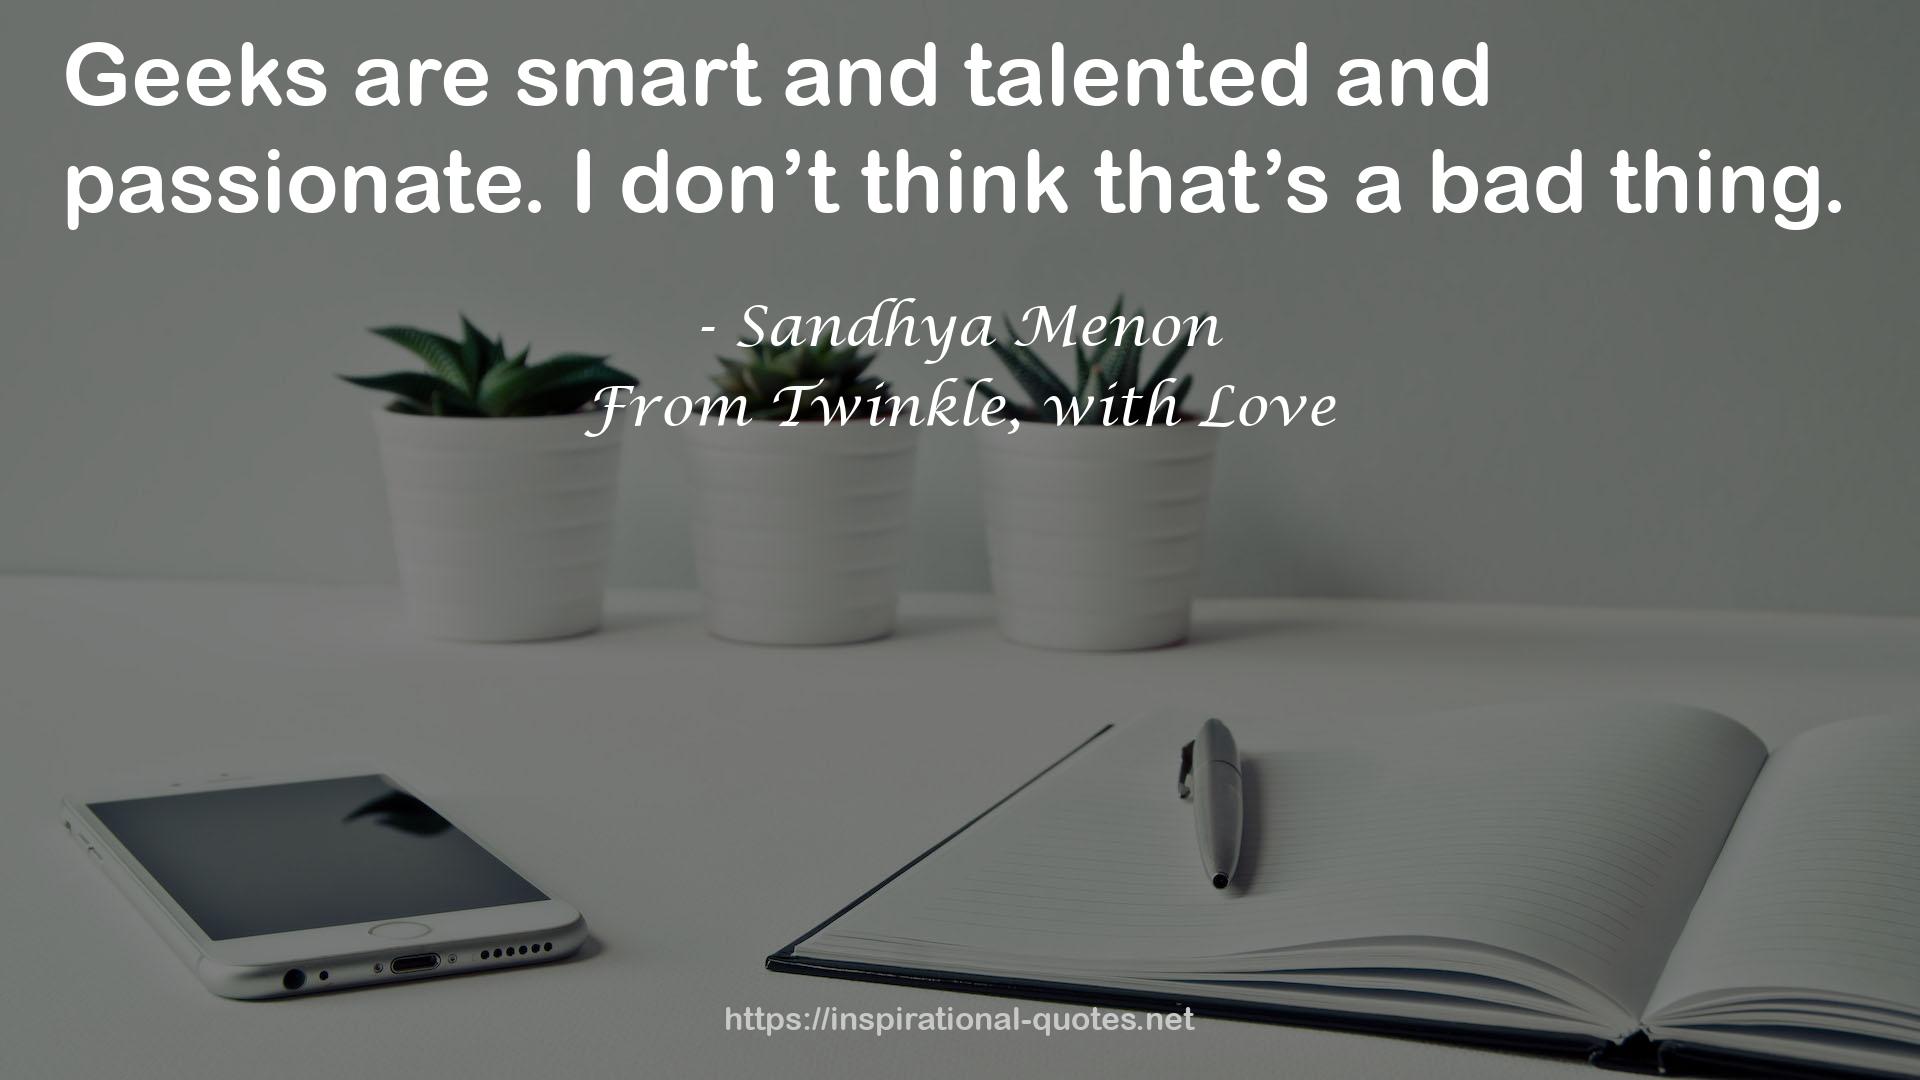 From Twinkle, with Love QUOTES